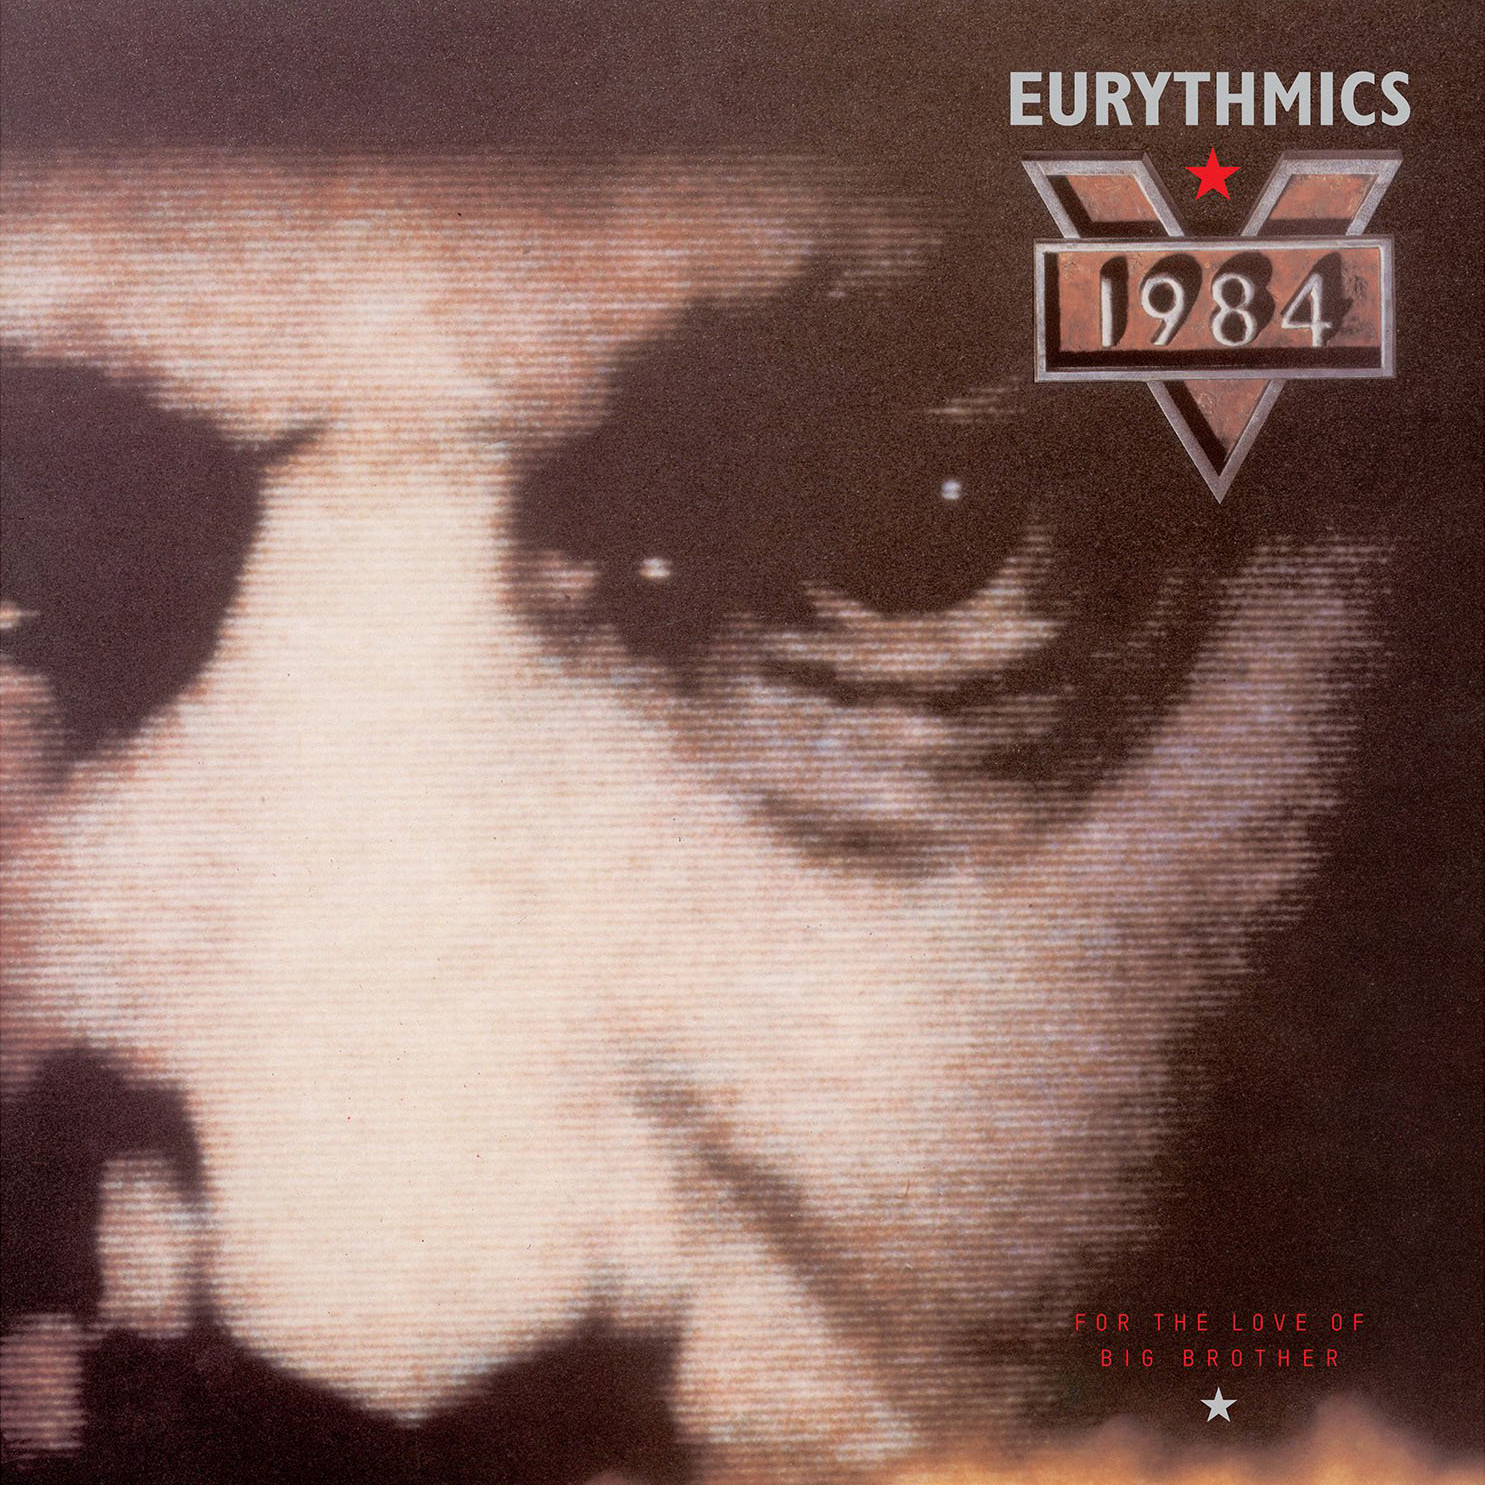 Eurythmics – 1984: For the Love of Big Brother (Remastered) (2018) [FLAC 24bit/96kHz]